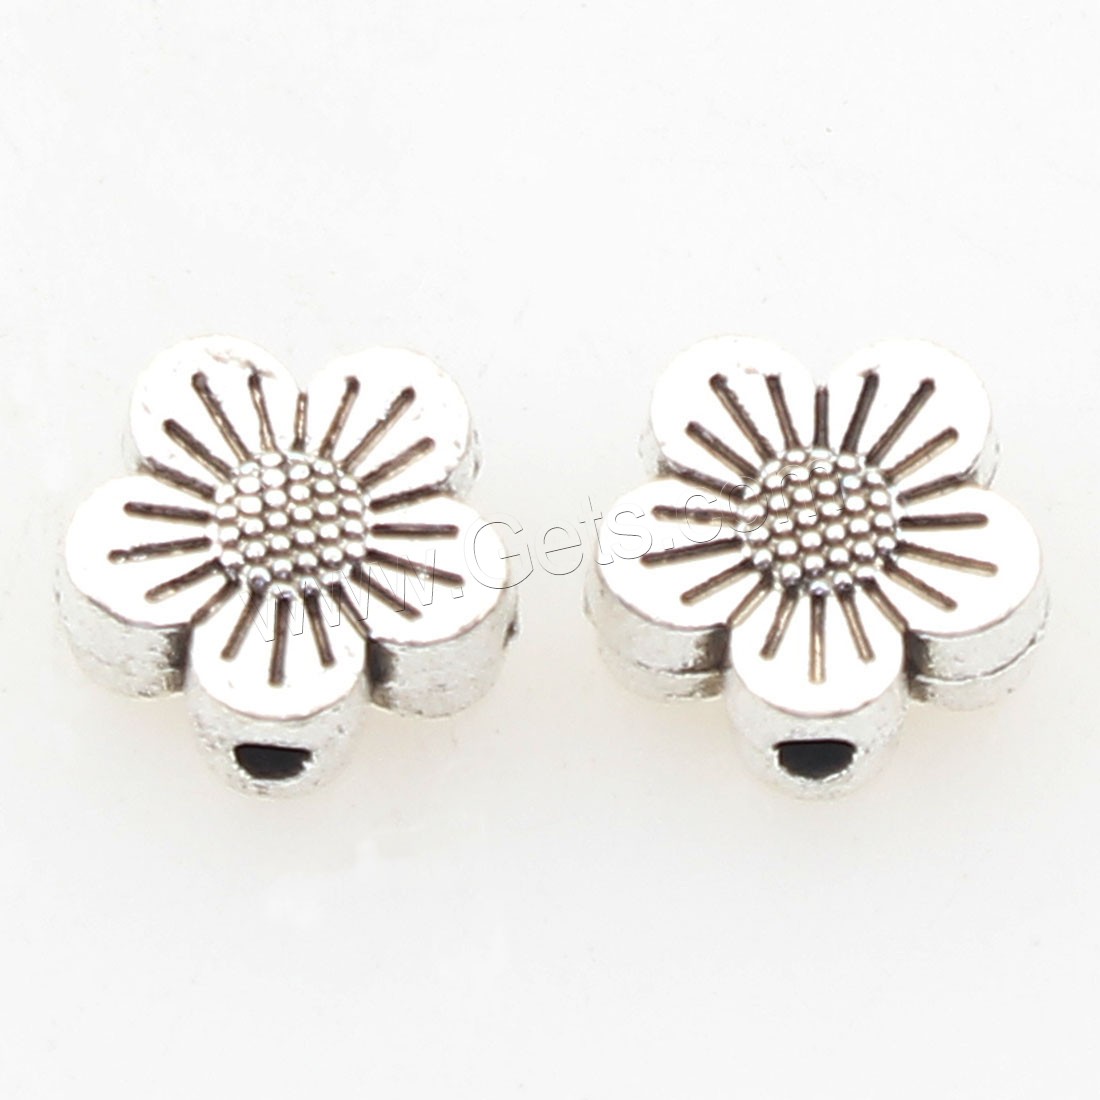 Zinc Alloy Jewelry Beads, antique silver color plated, 8x8x3mm, Hole:Approx 1mm, Approx 830PCs/Bag, Sold By Bag